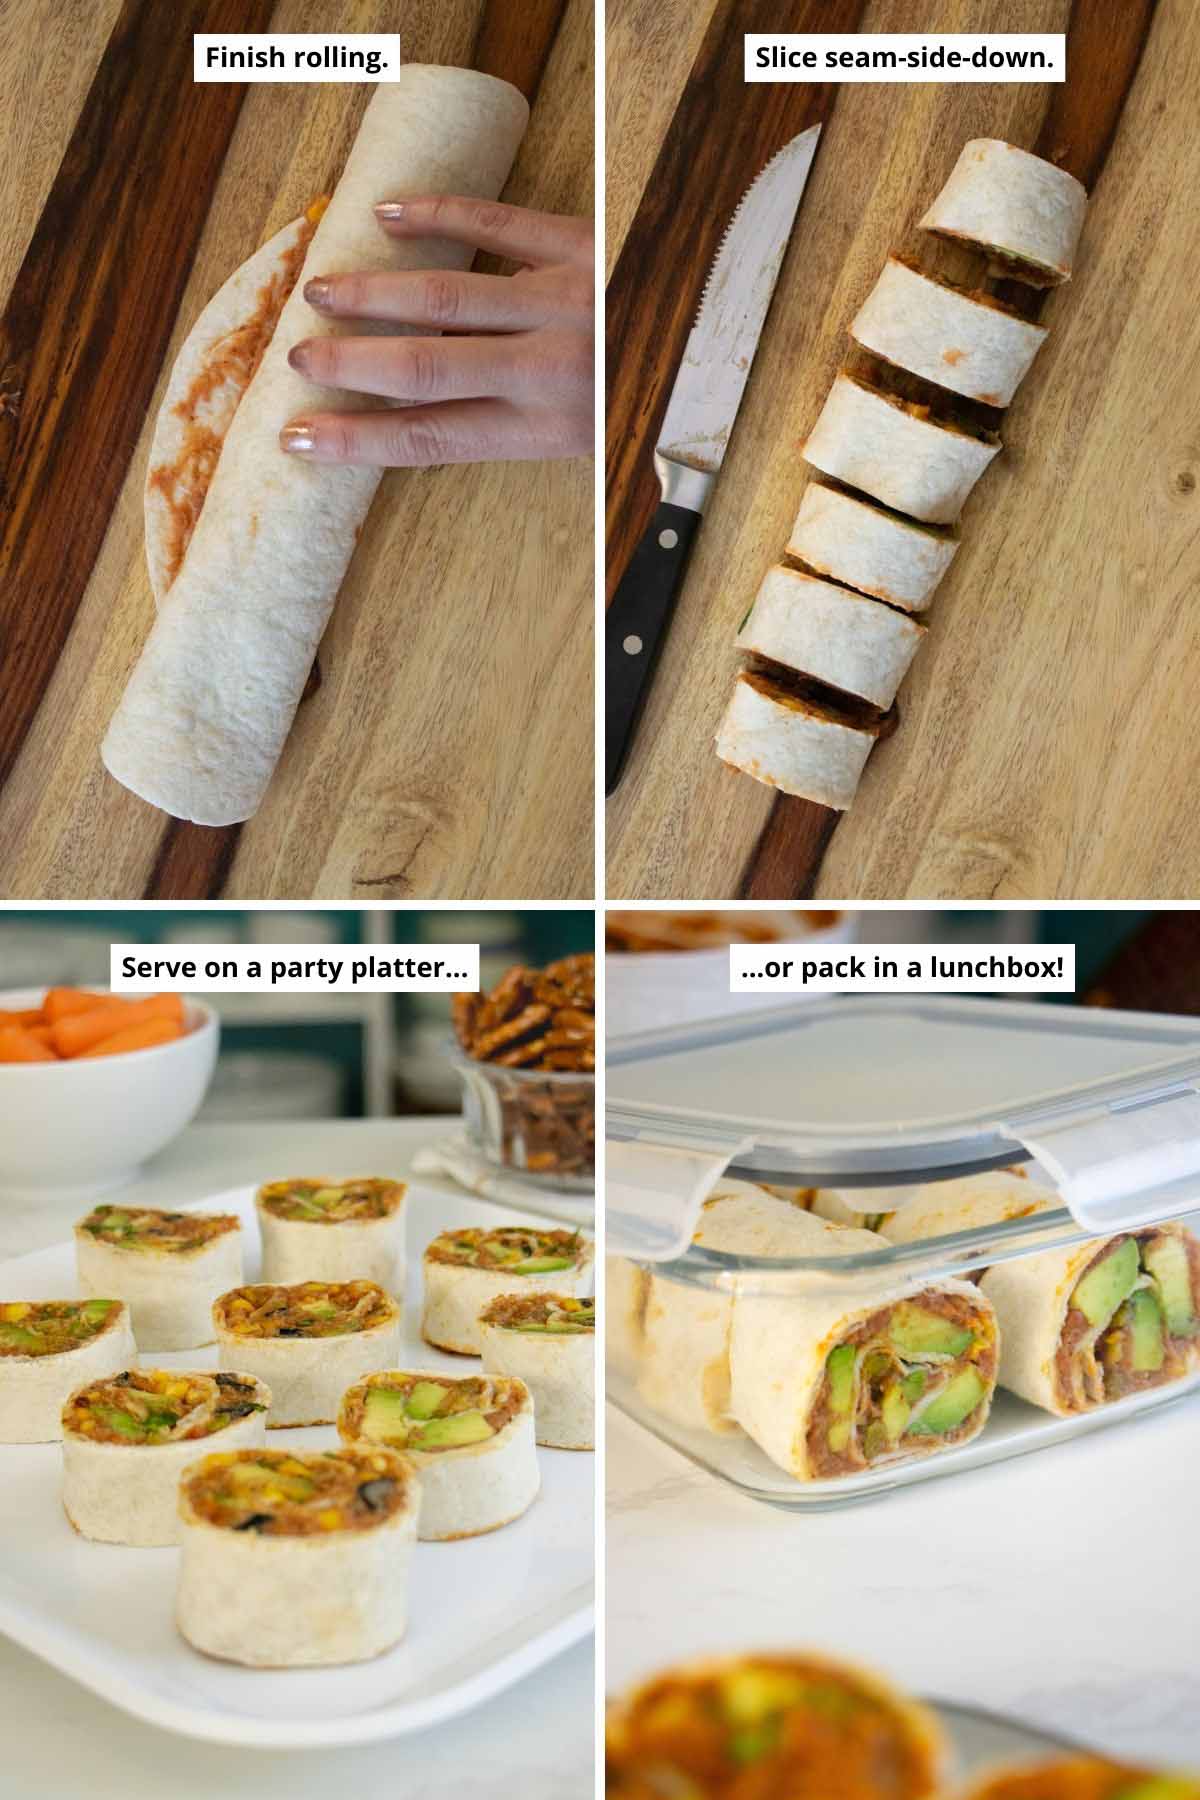 image collage showing the vegan pinwheels before and after slicing and on a party platter and in a lunchbox